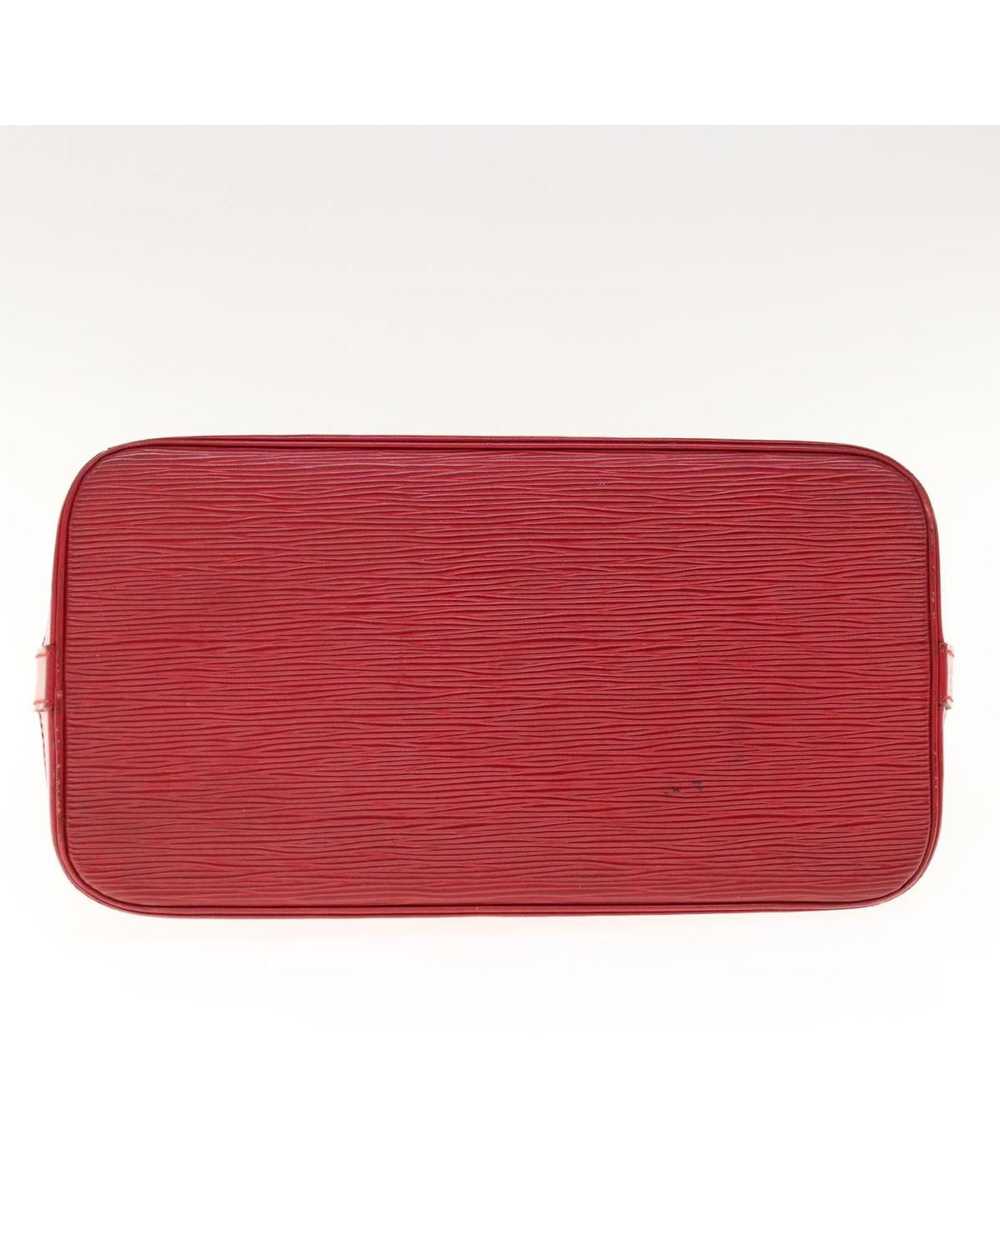 Louis Vuitton Red Epi Leather Hand Bag with Acces… - image 5